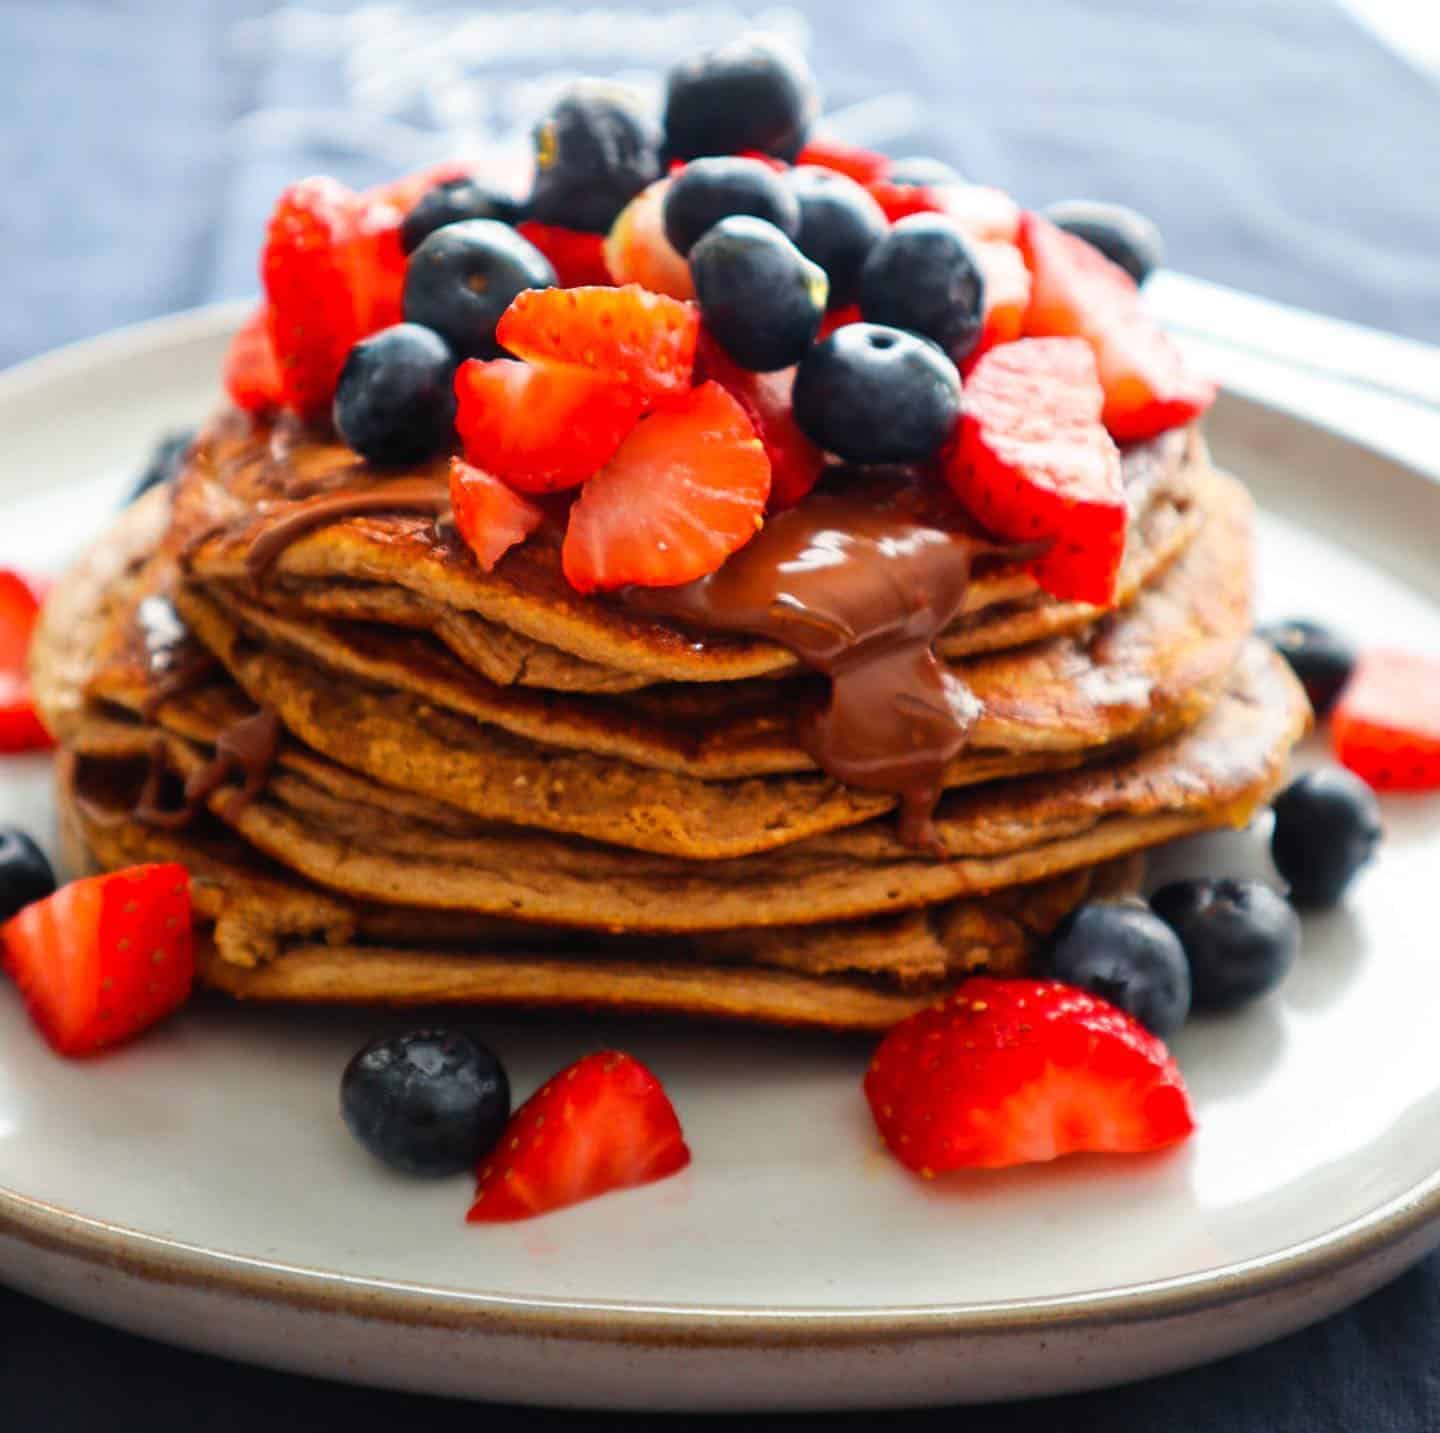 These Healthy Chocolate Protein Pancakes are loaded with fresh Strawberries, Blueberries, Chocolate sauce and Honey. It is the perfect Breakfast for a busy and energetic day 😋
.
.
.
.
.

#proteinpancakes #pancakes #protein #healthyfood #breakfast #fitness #proteinpowder #feedfeed #todayfood #berries #f52grams #proteinfood #healthylifestyle #healthypancakes #healthybreakfast #foodie #food #foodporn #pancakestack #proteinpacked #pancake #healthy #nutrition #proteinbreakfast #breakfastideas #bhfyp